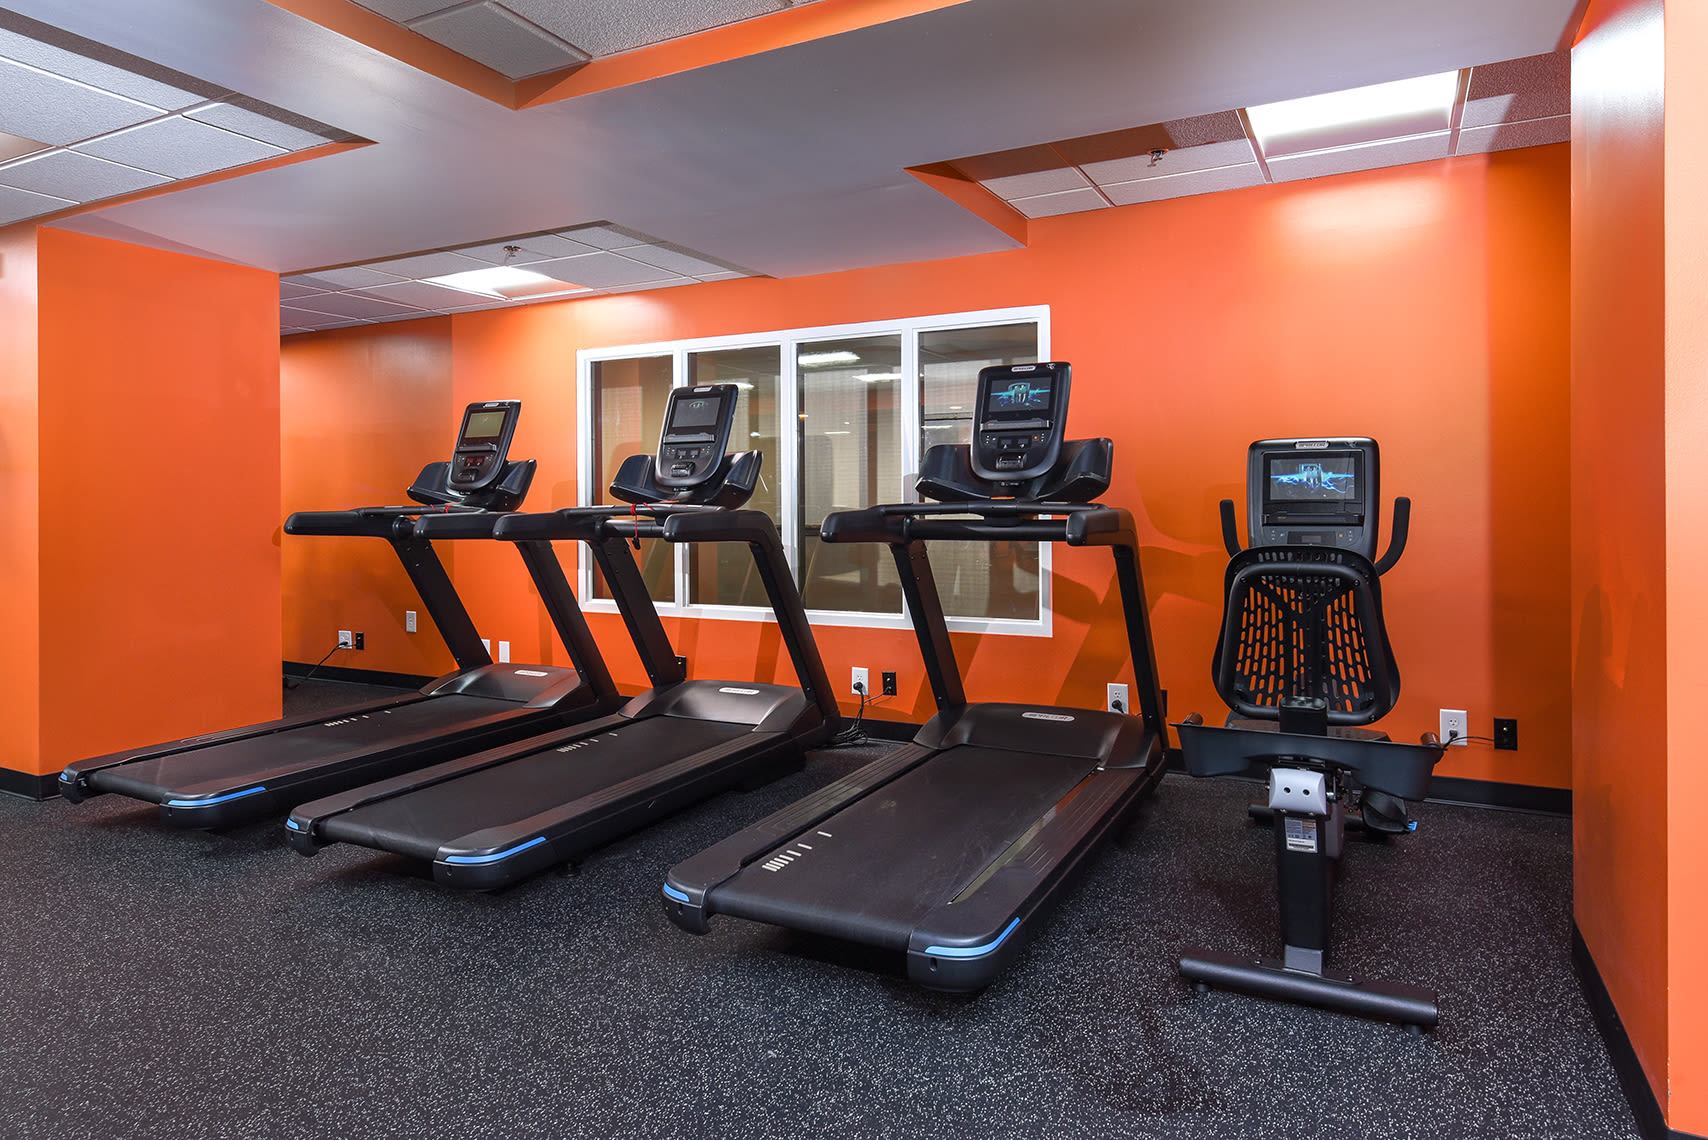 Fitness center at Cherry Hill Towers in Cherry Hill, New Jersey